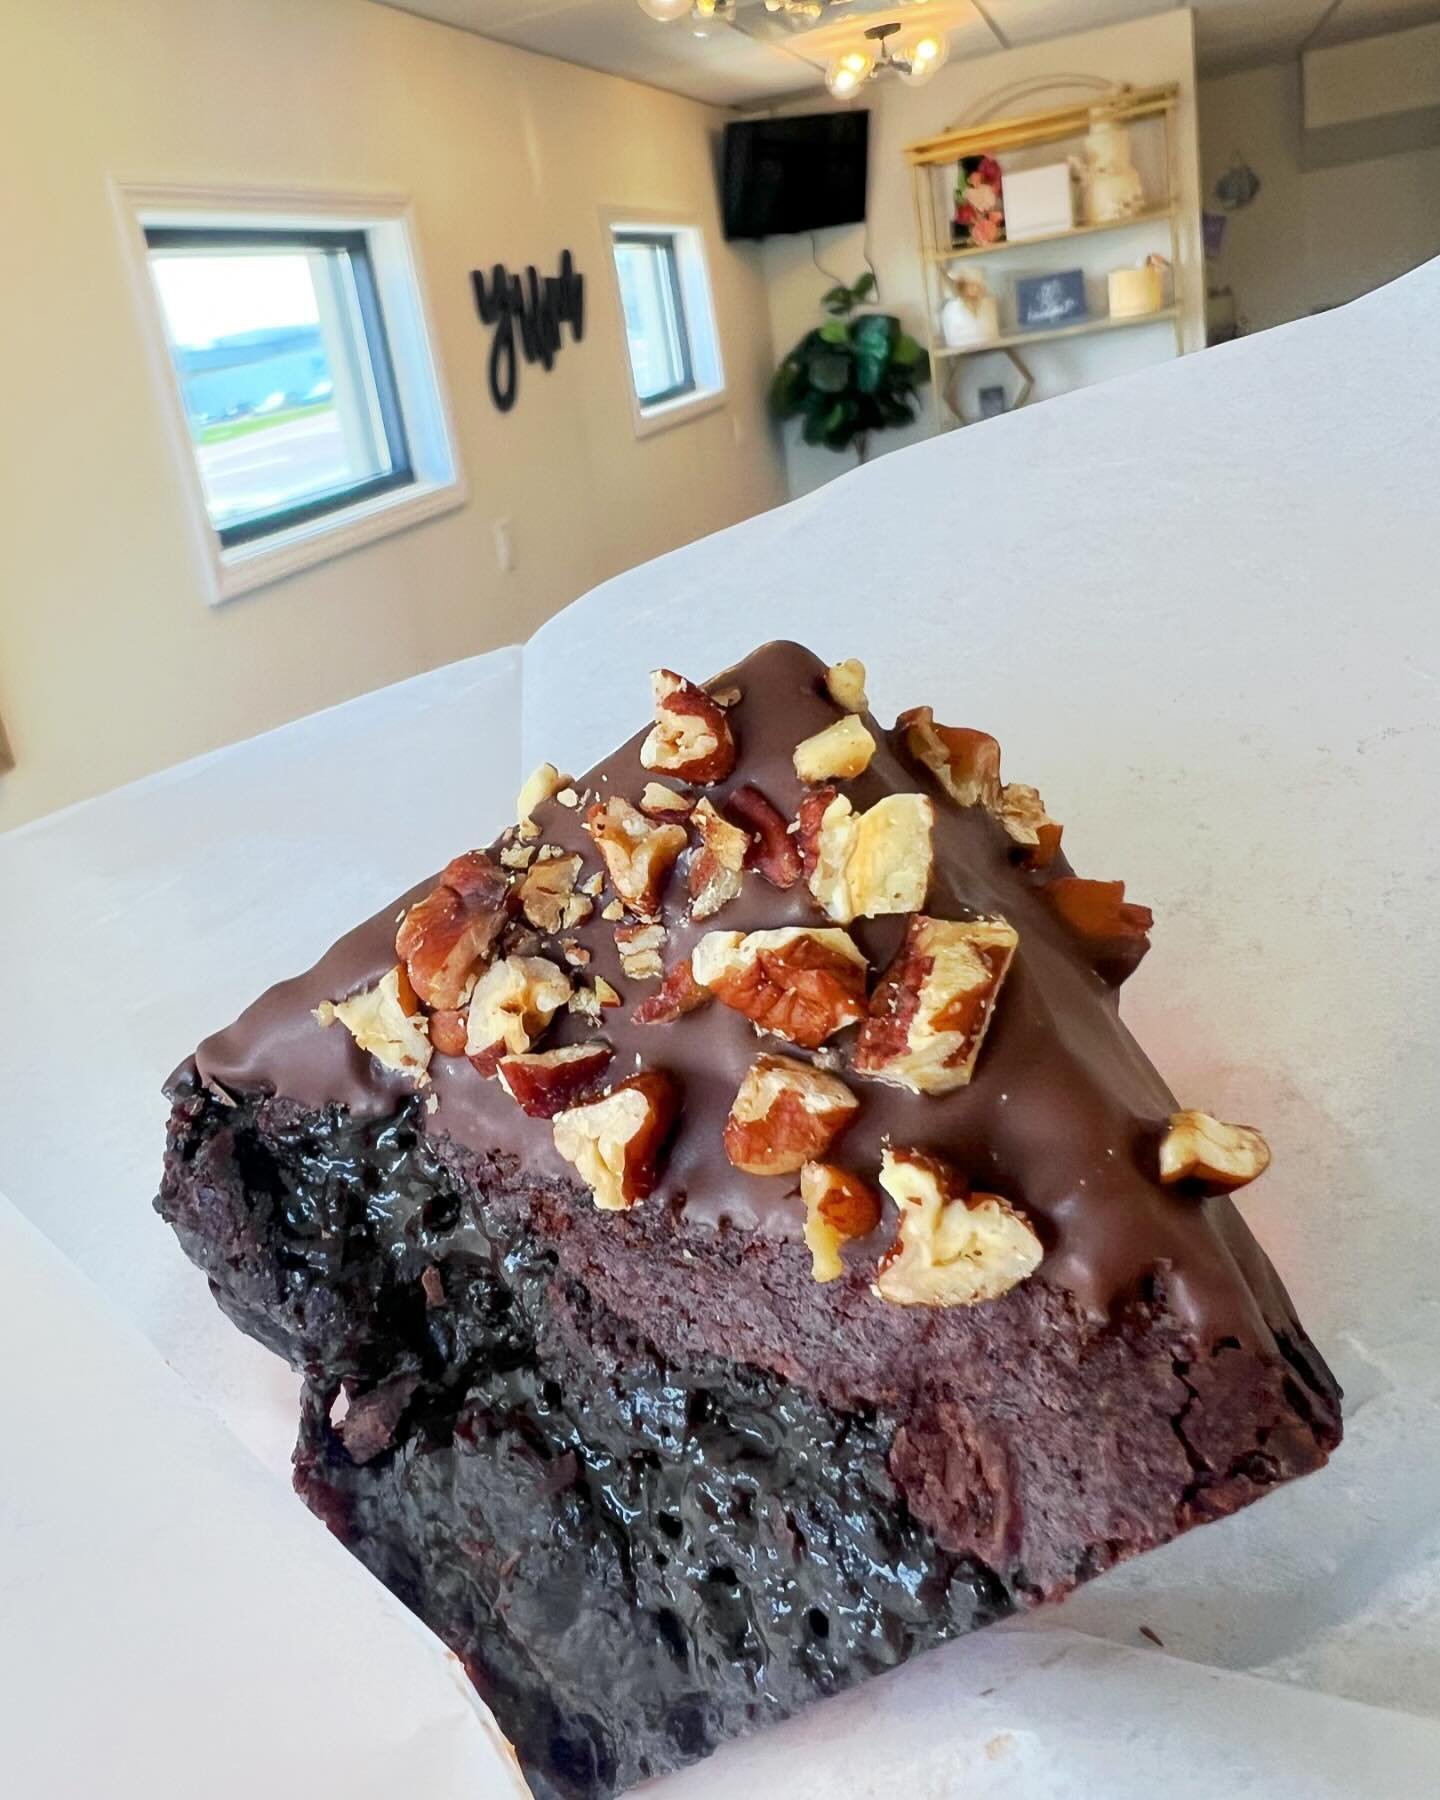 Have you tried our Turtle Brownies yet?? Swirled with salted caramel, dipped in chocolate and crushed toasted pecans, they may be one of the most decadent items on our menu🤎🤎🤎

#lushcakesmn #mnbakery #mncakery #dessert #cakeshop #sweettooth #brown